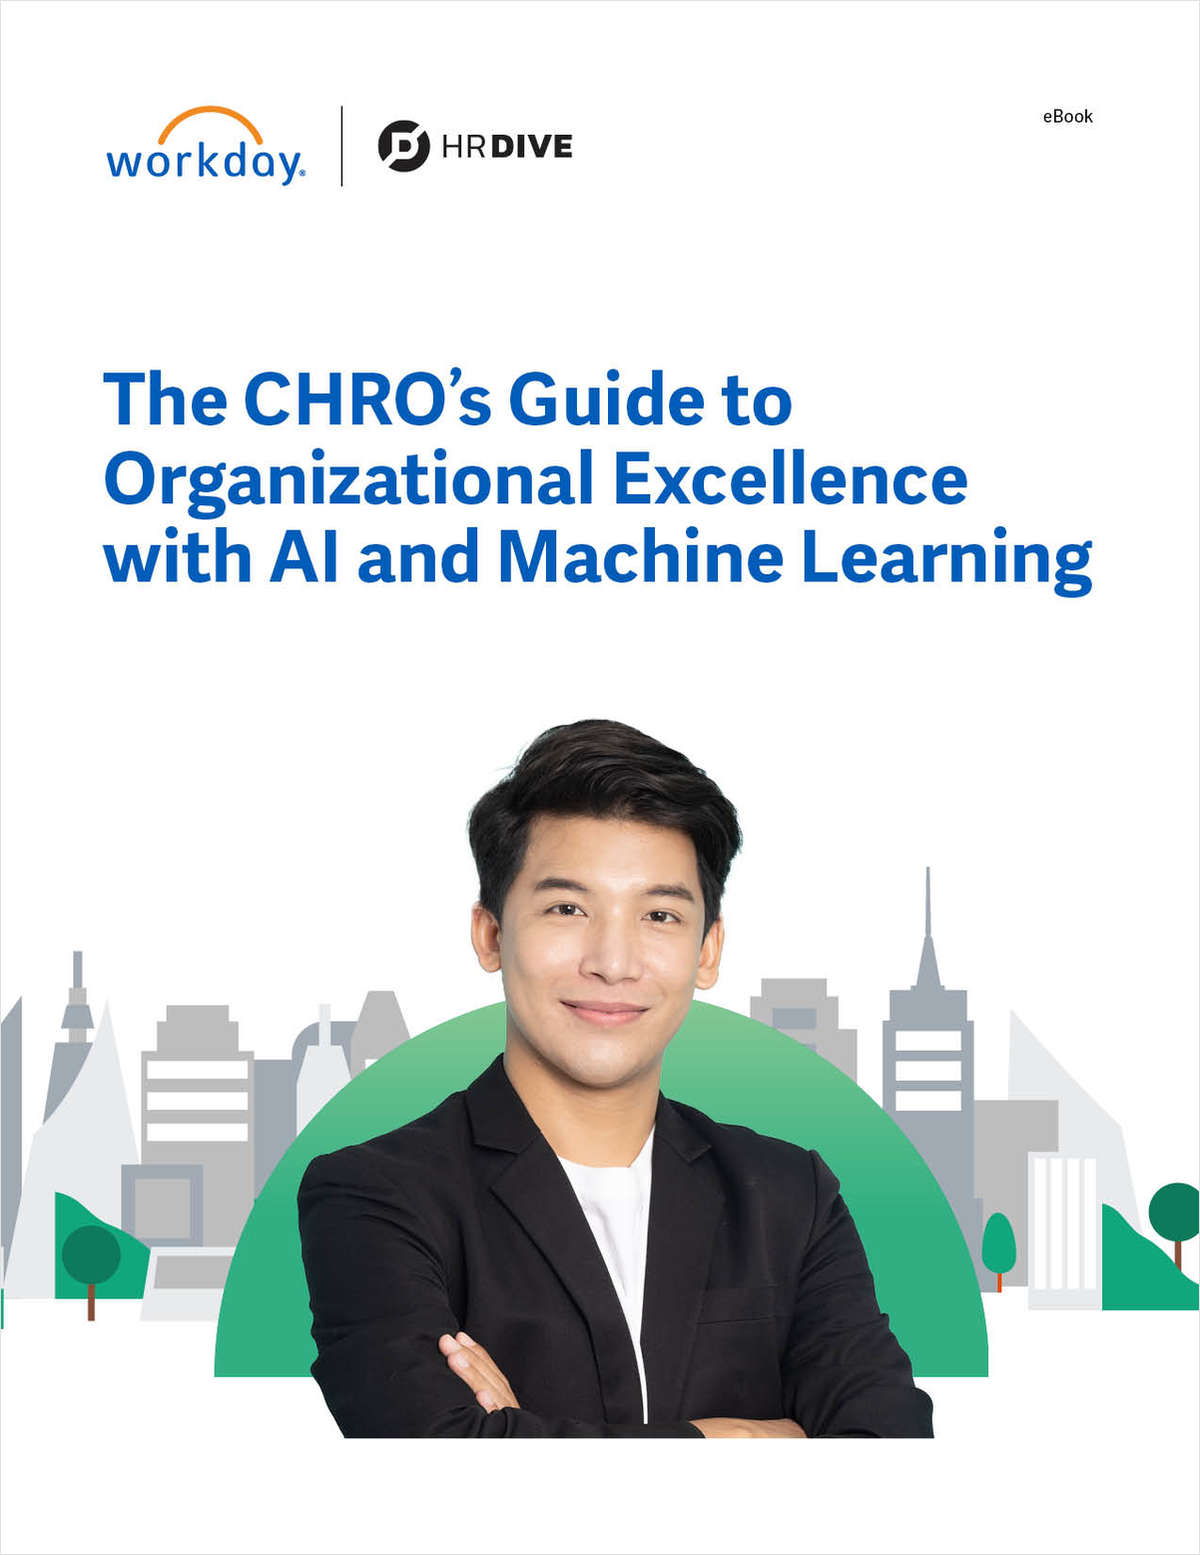 The CHRO's Guide to Organizational Excellence with AI and Machine Learning